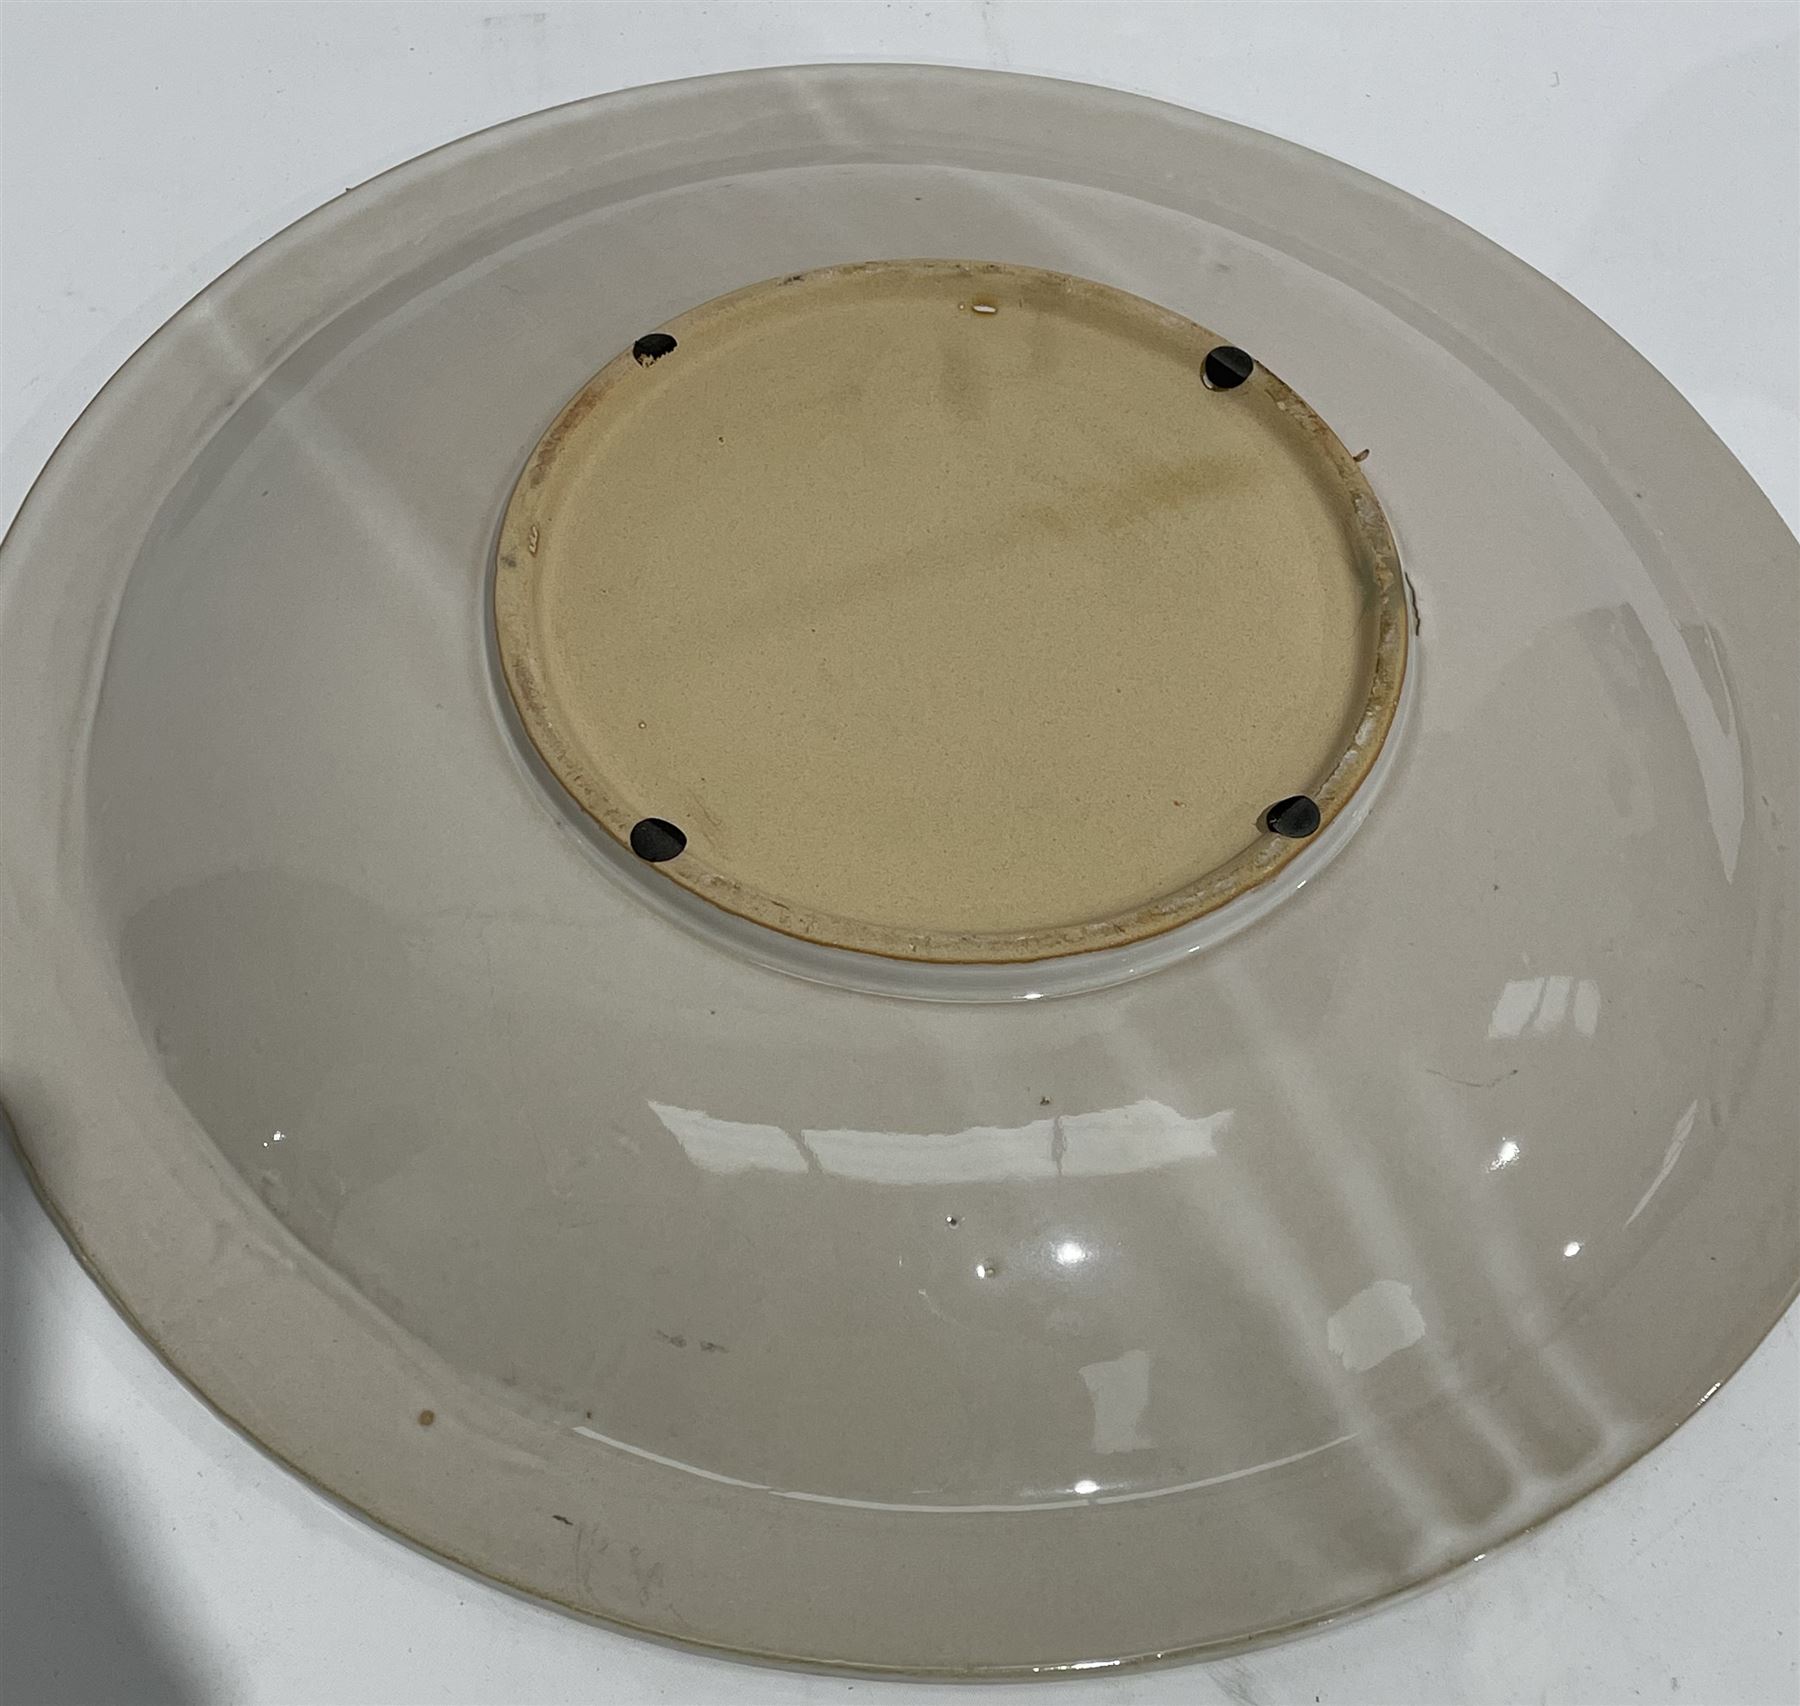 Modern Chinese style glazed charger with fluted interior - Image 2 of 2